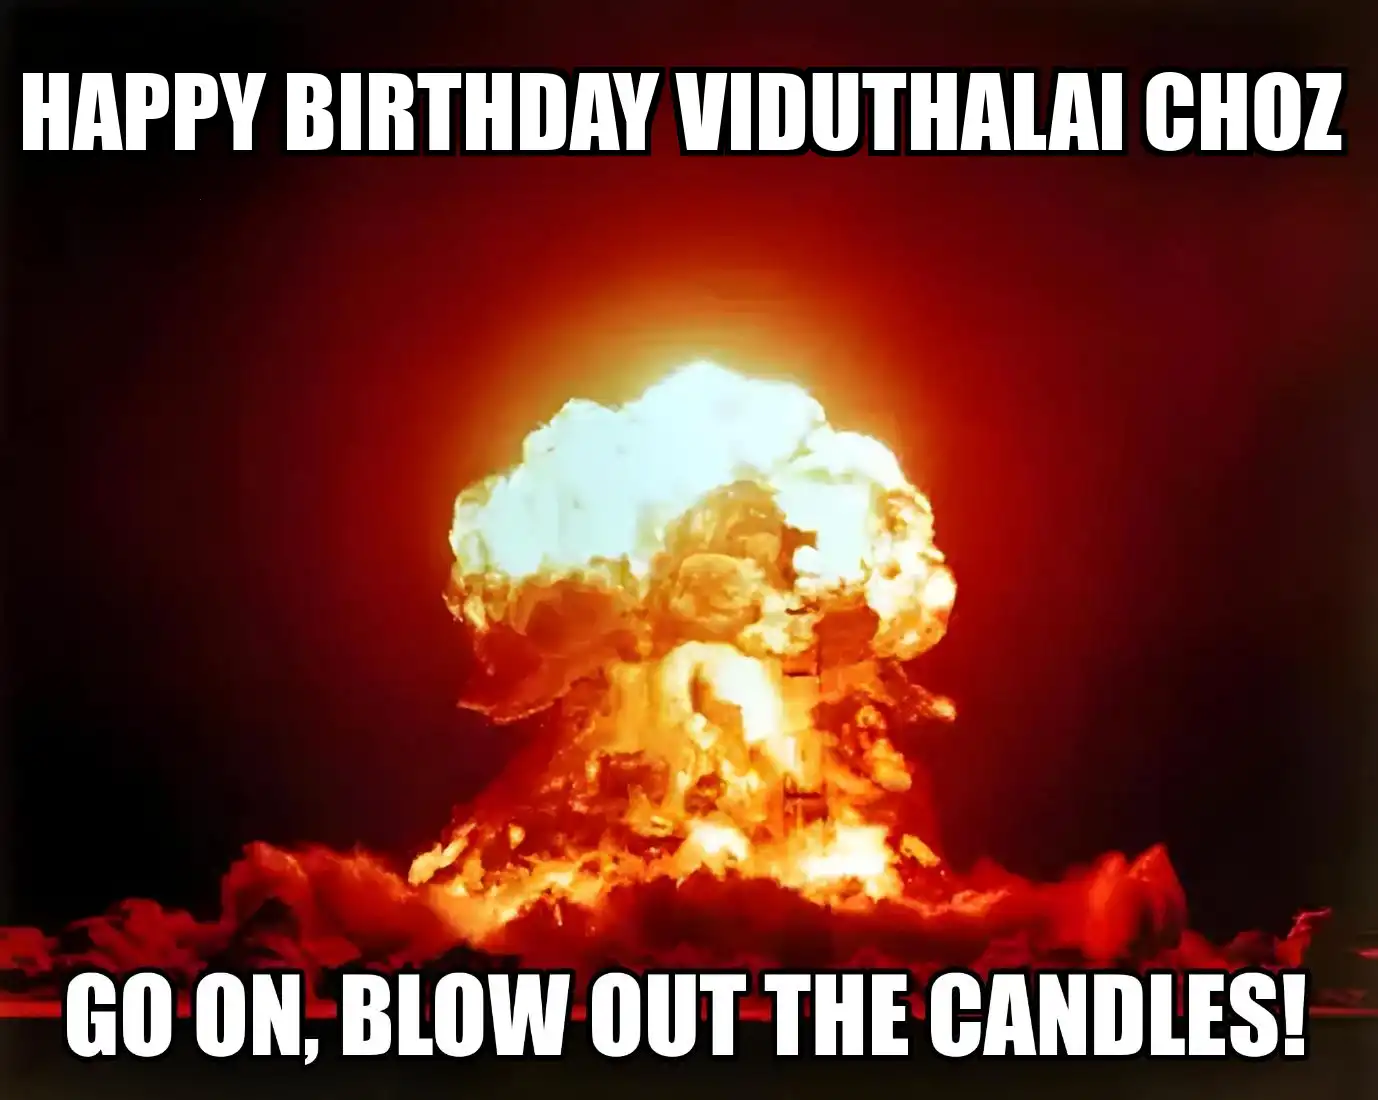 Happy Birthday Viduthalai choz Go On Blow Out The Candles Meme